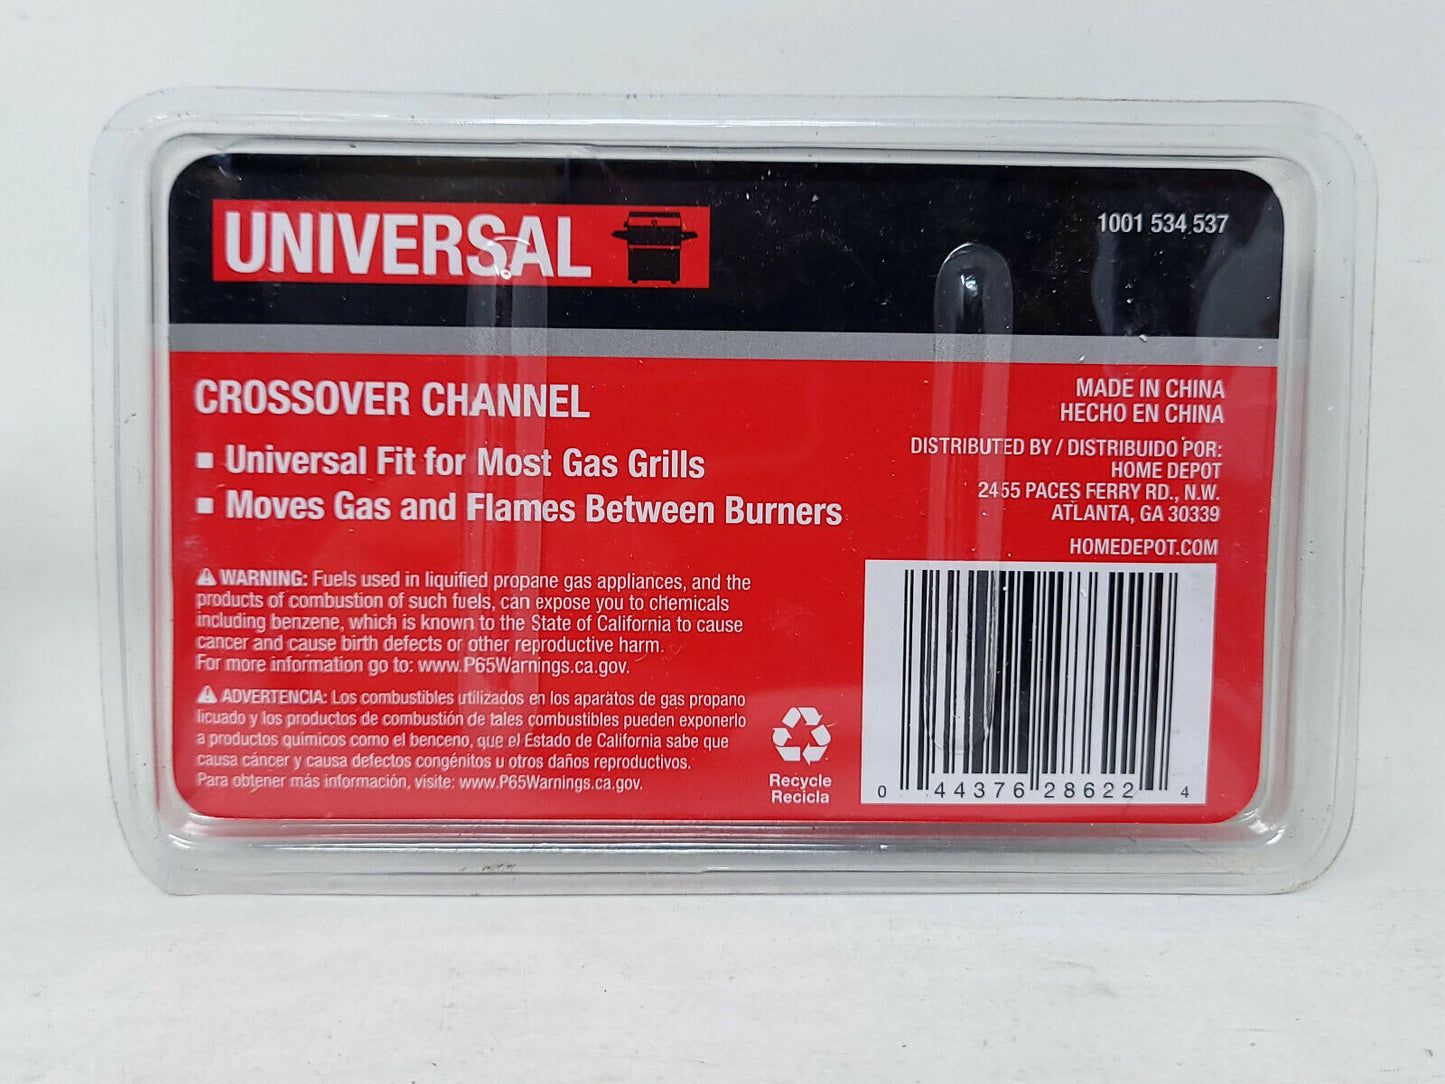 Lot of 2x Universal Crossover Channel Kit Fits Most Gas Grills - NEW